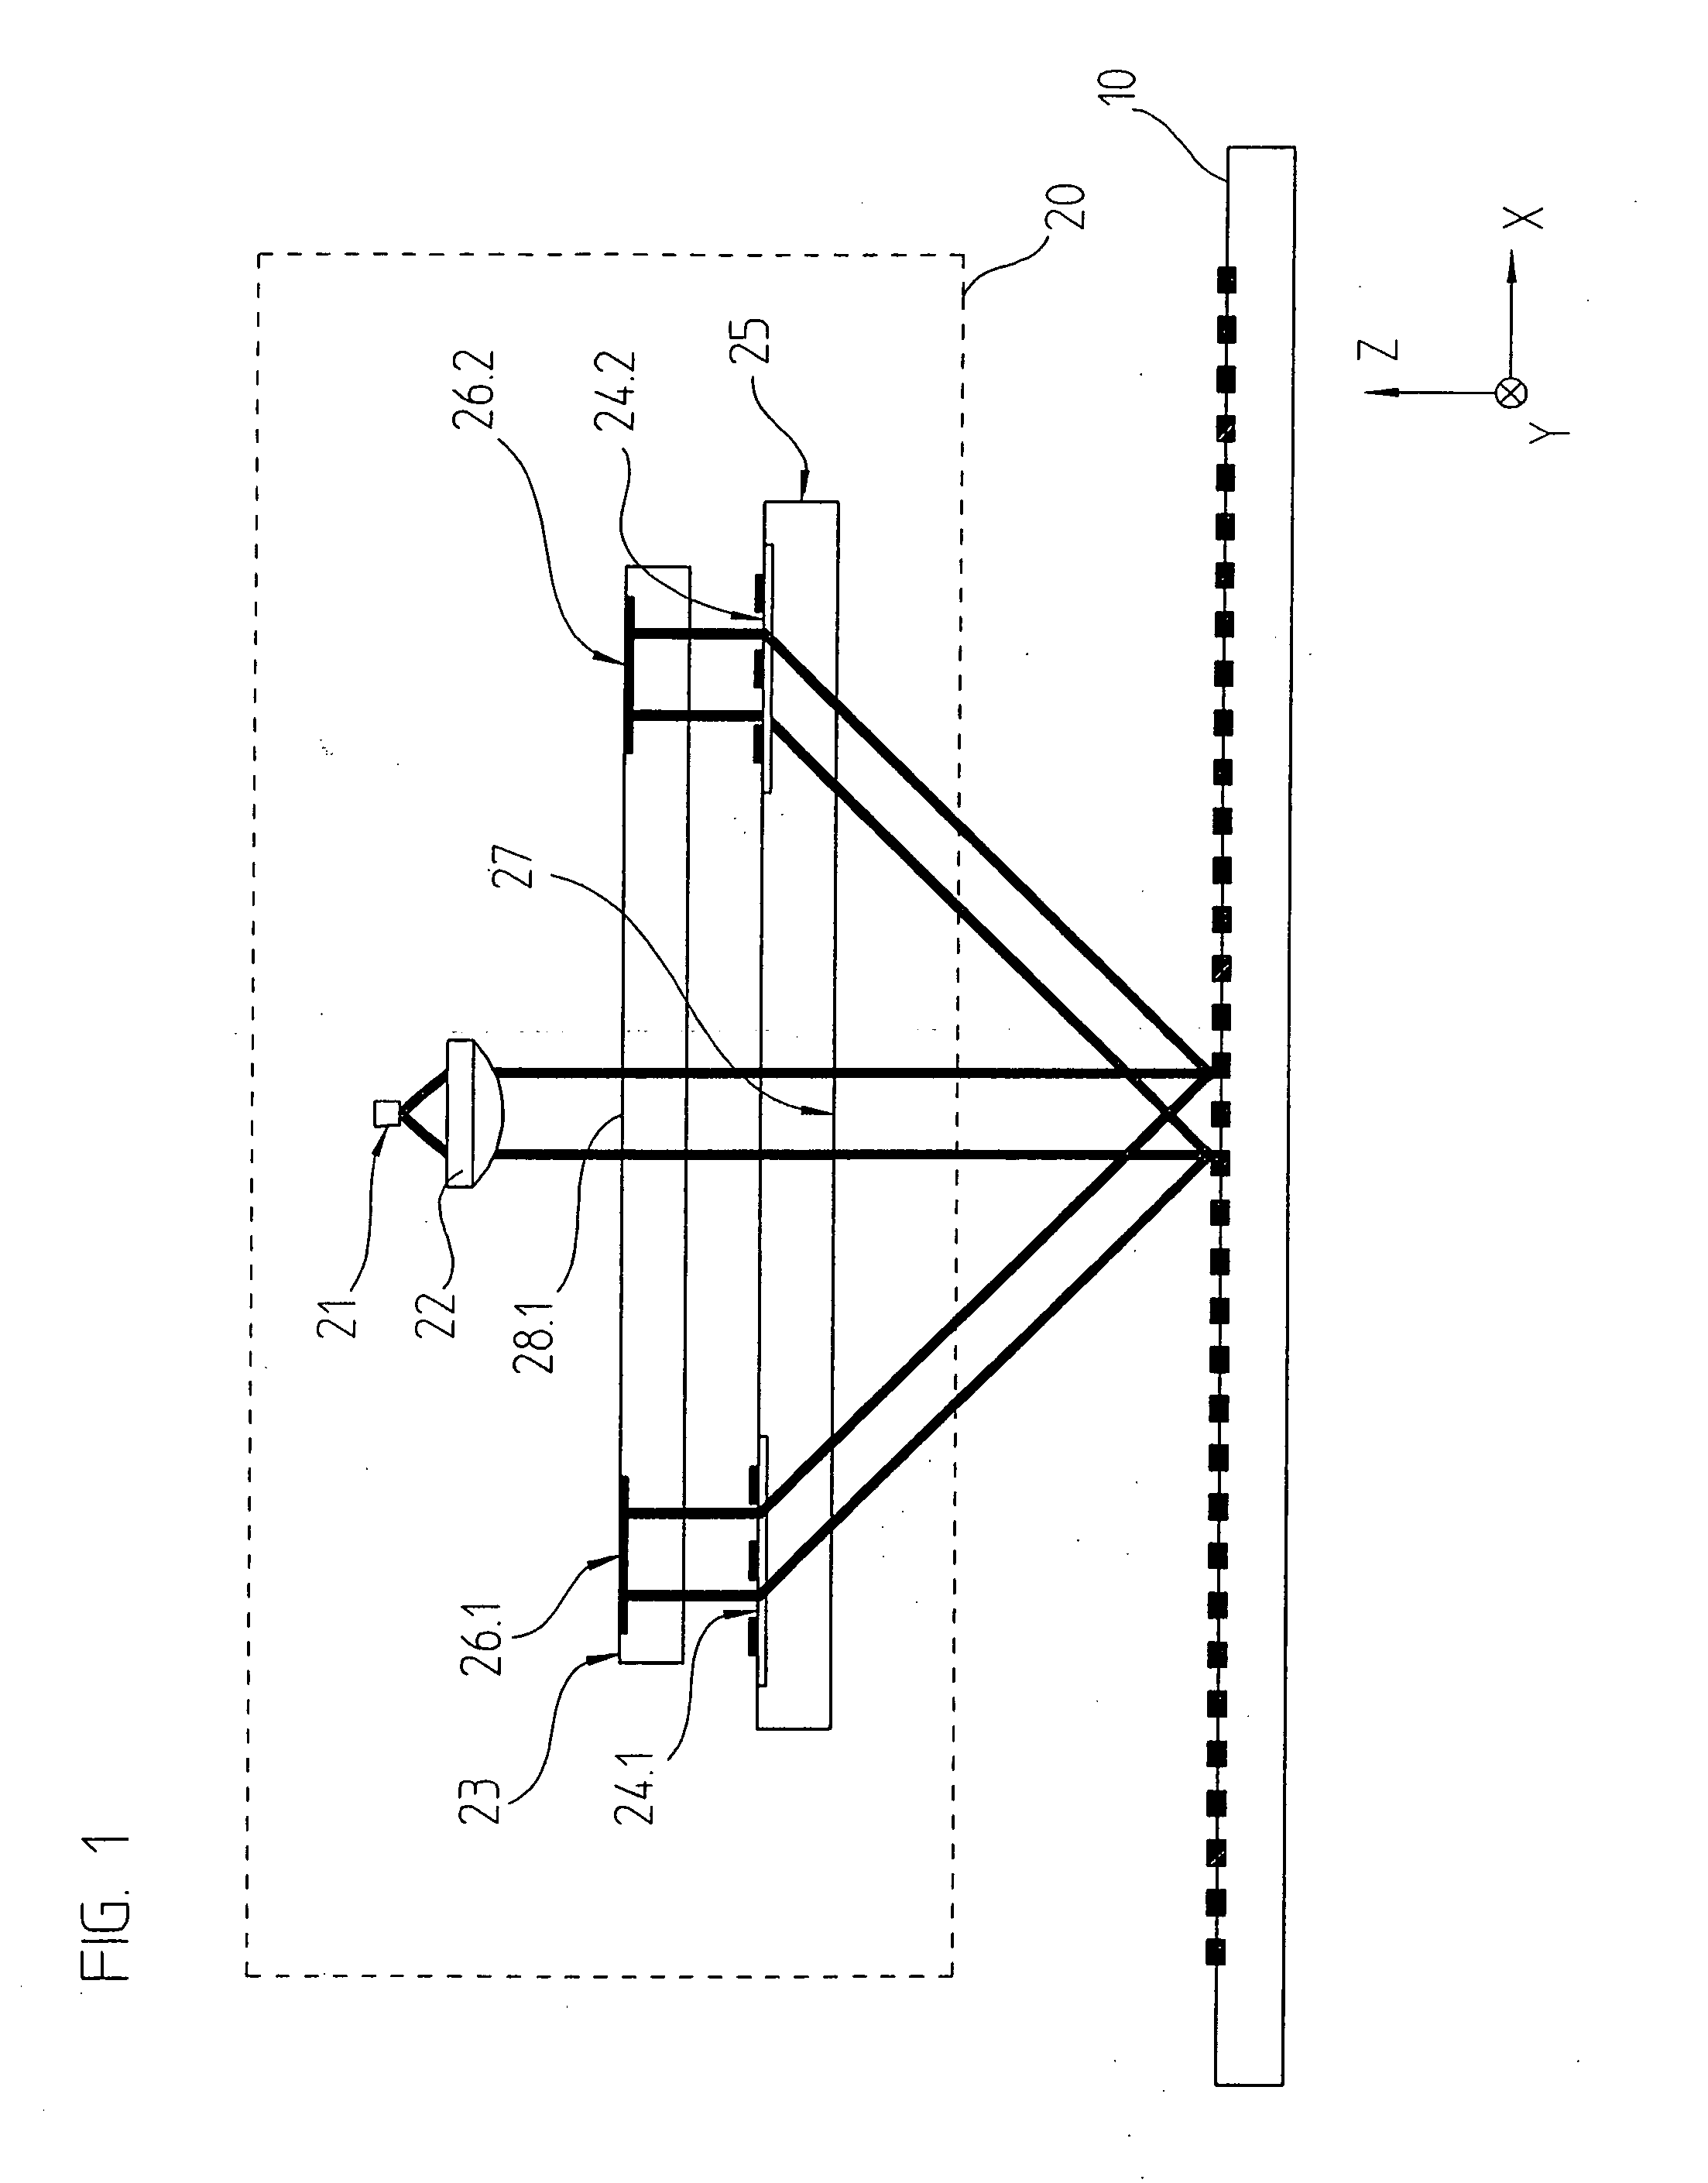 Position-measuring device